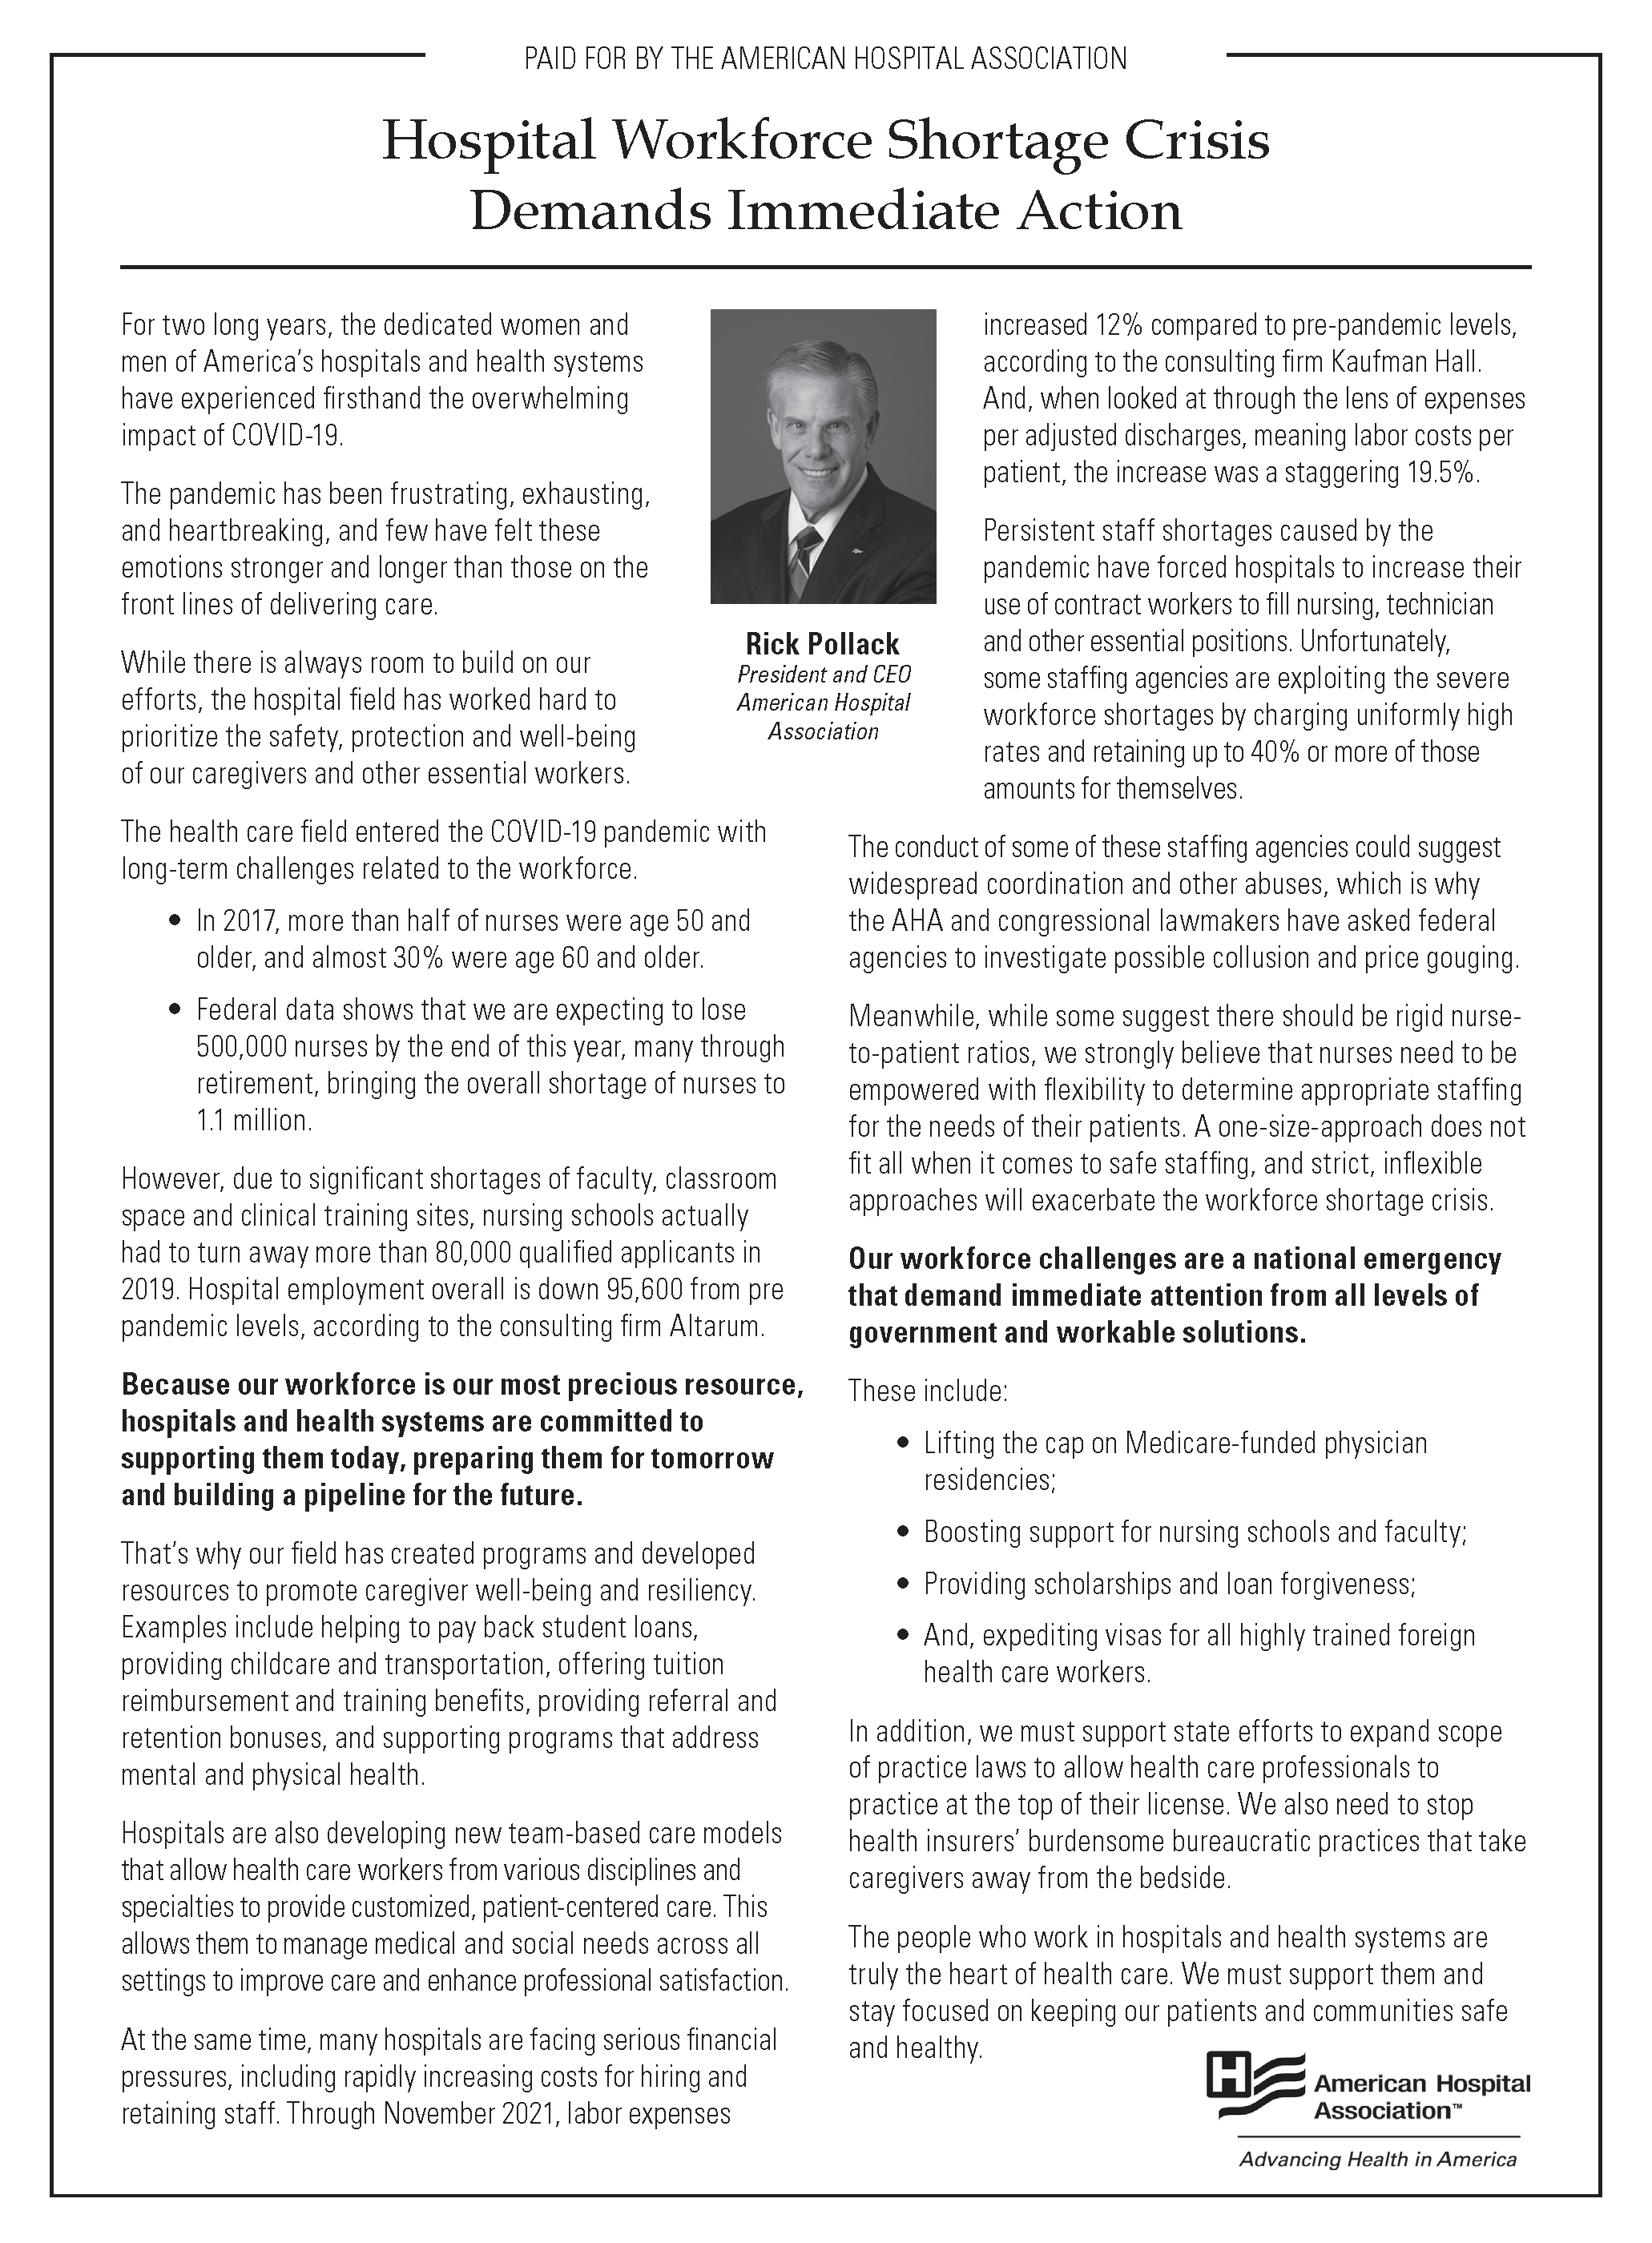 Hospital Workforce Shortage Crisis Demands Immediate Action by Rick Pollack, President and CEO, American Hospital Association.